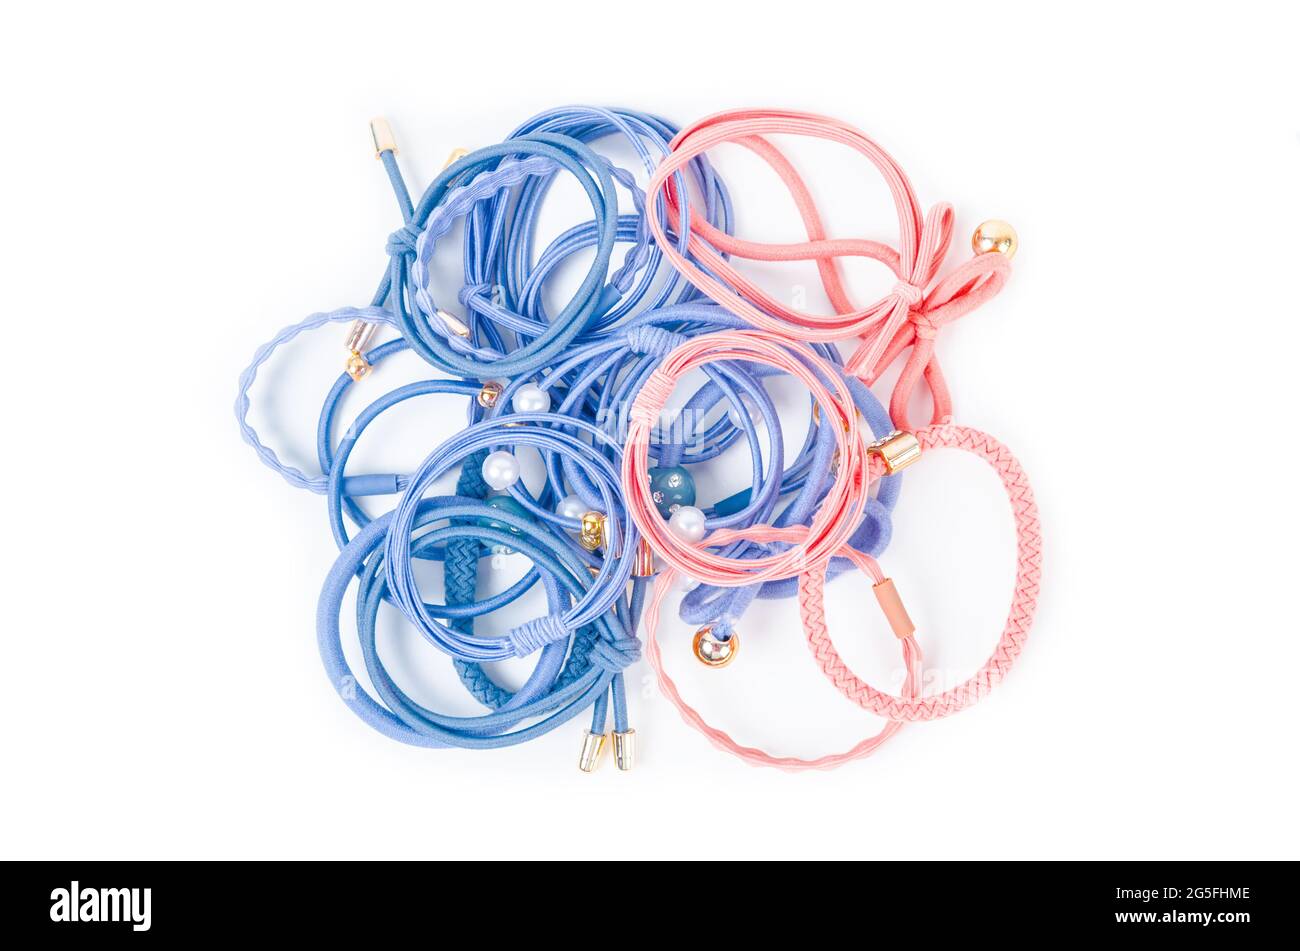 Heap of colorful fabric rubber bands. Elastic hair ties in vibrant colors on white background. Stock Photo